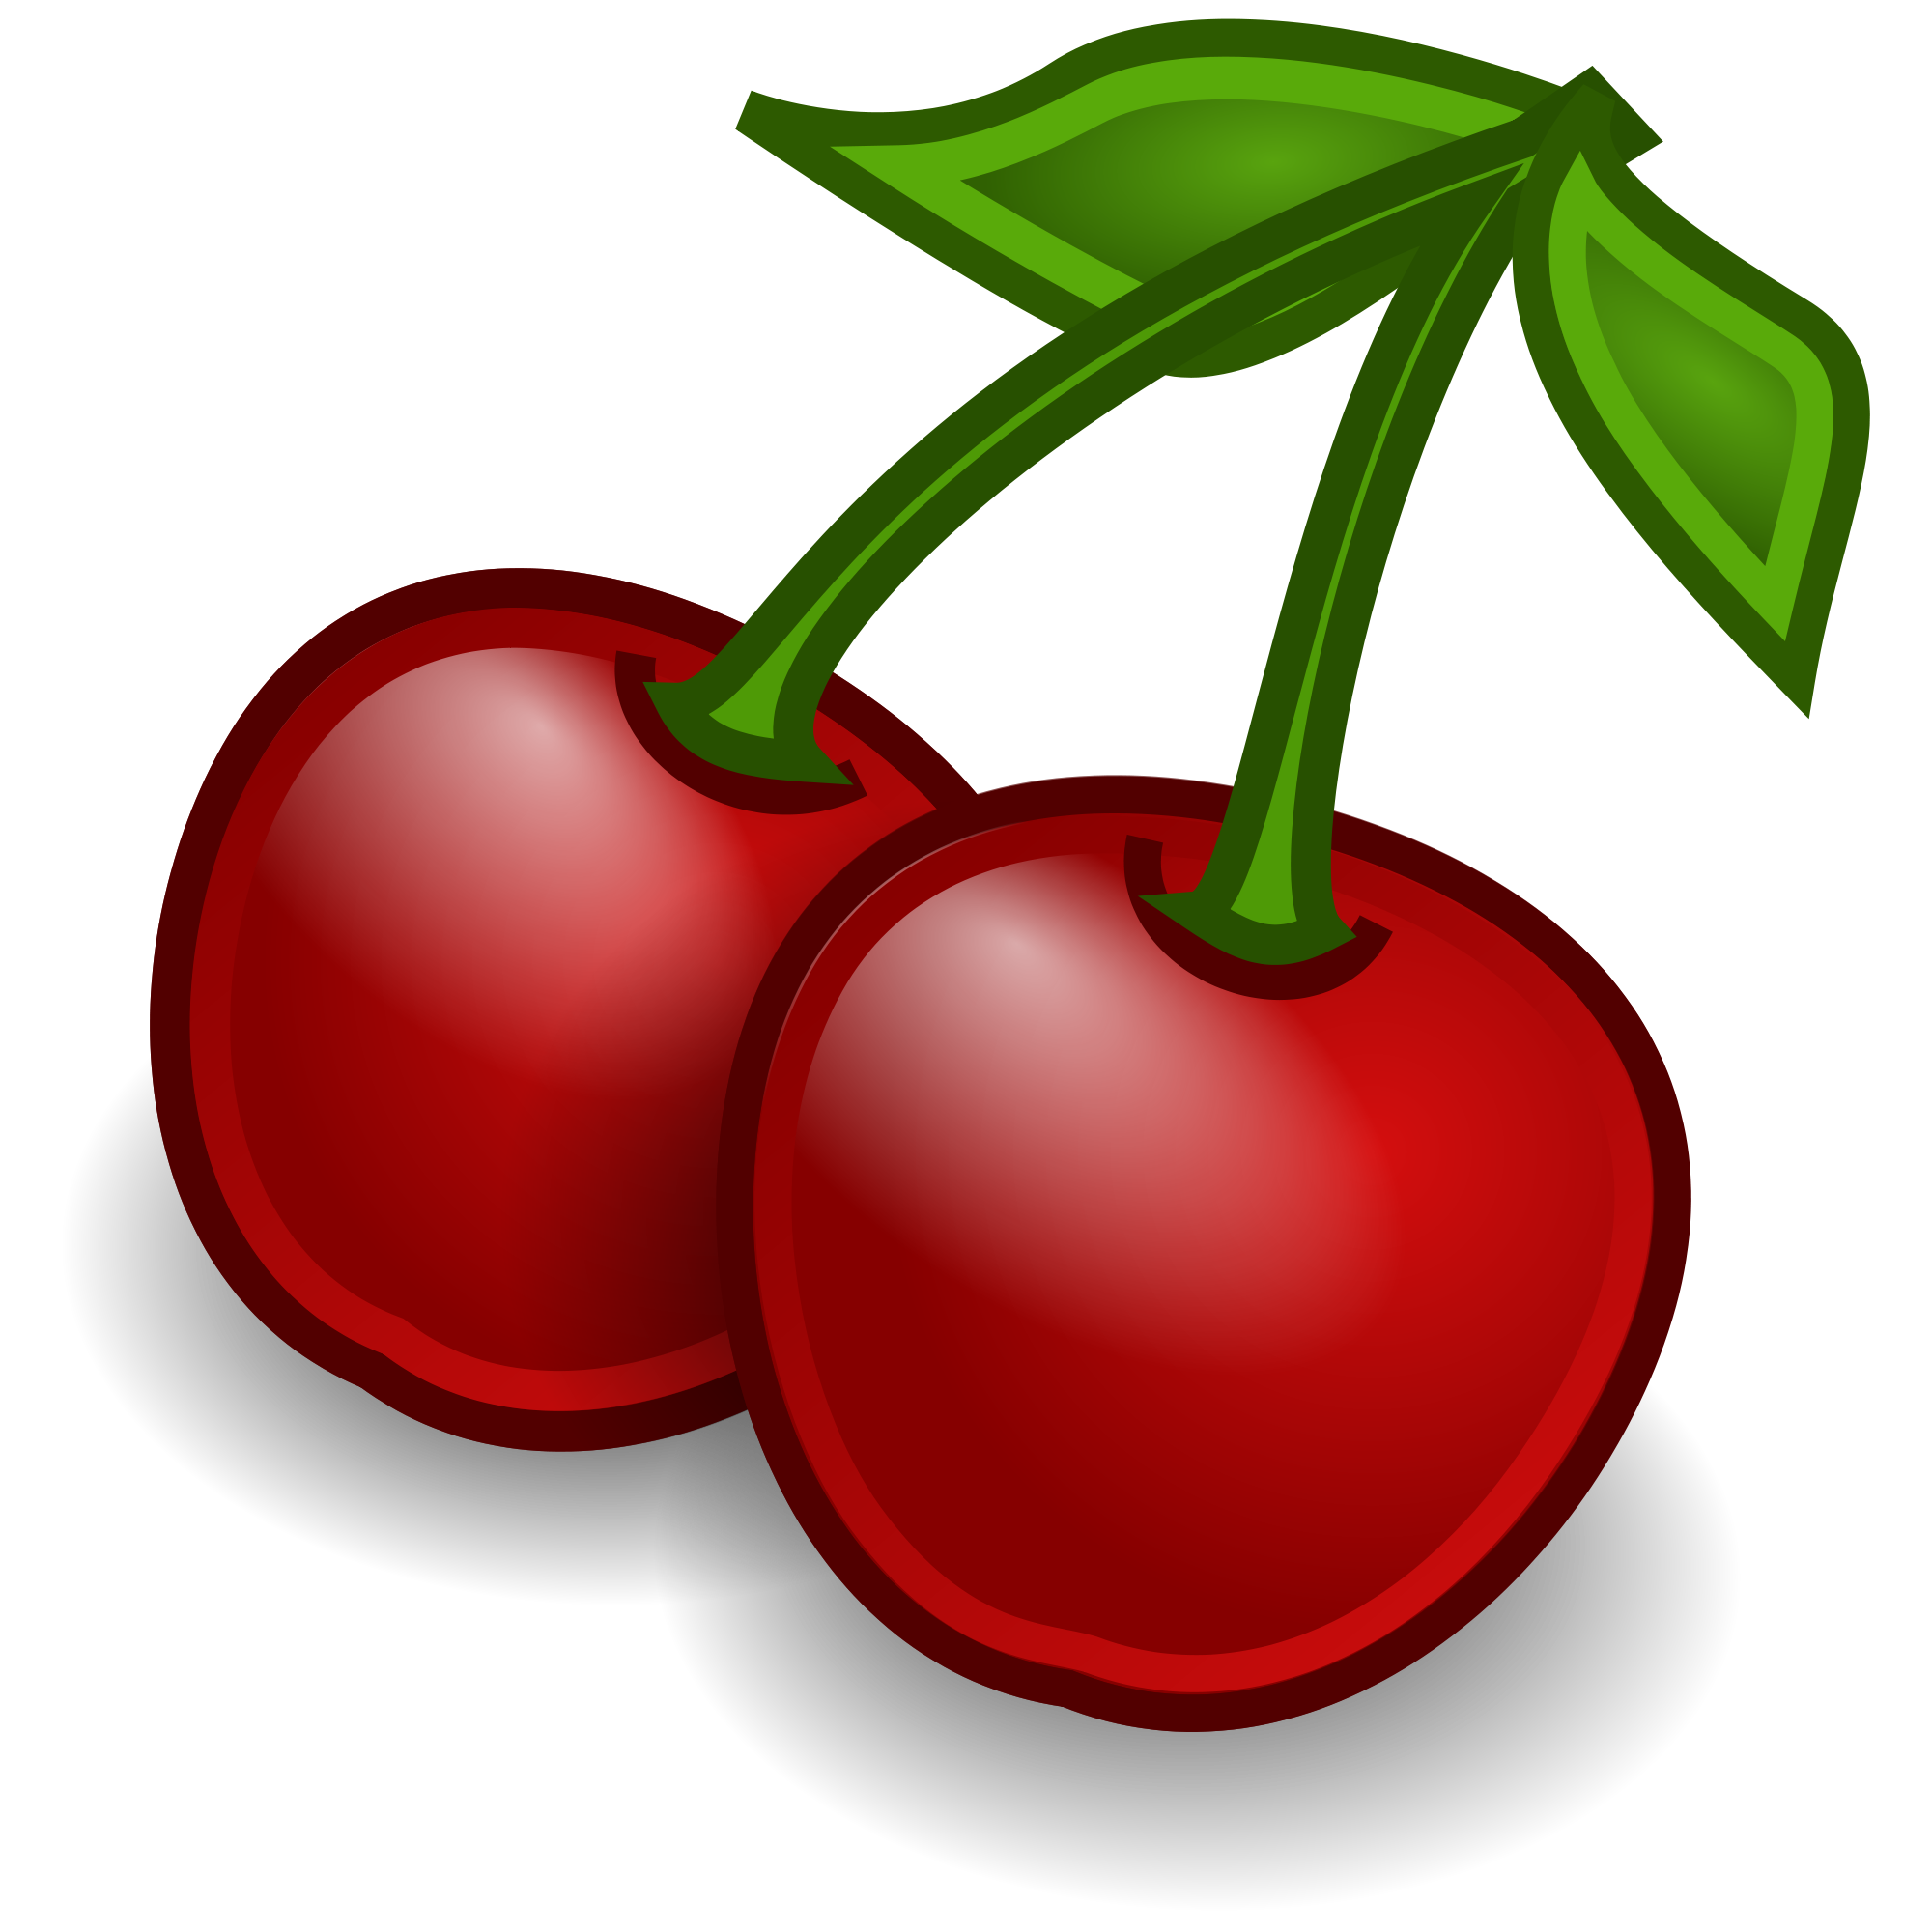 Cherries clipart file. Fruit svg wikimedia commons